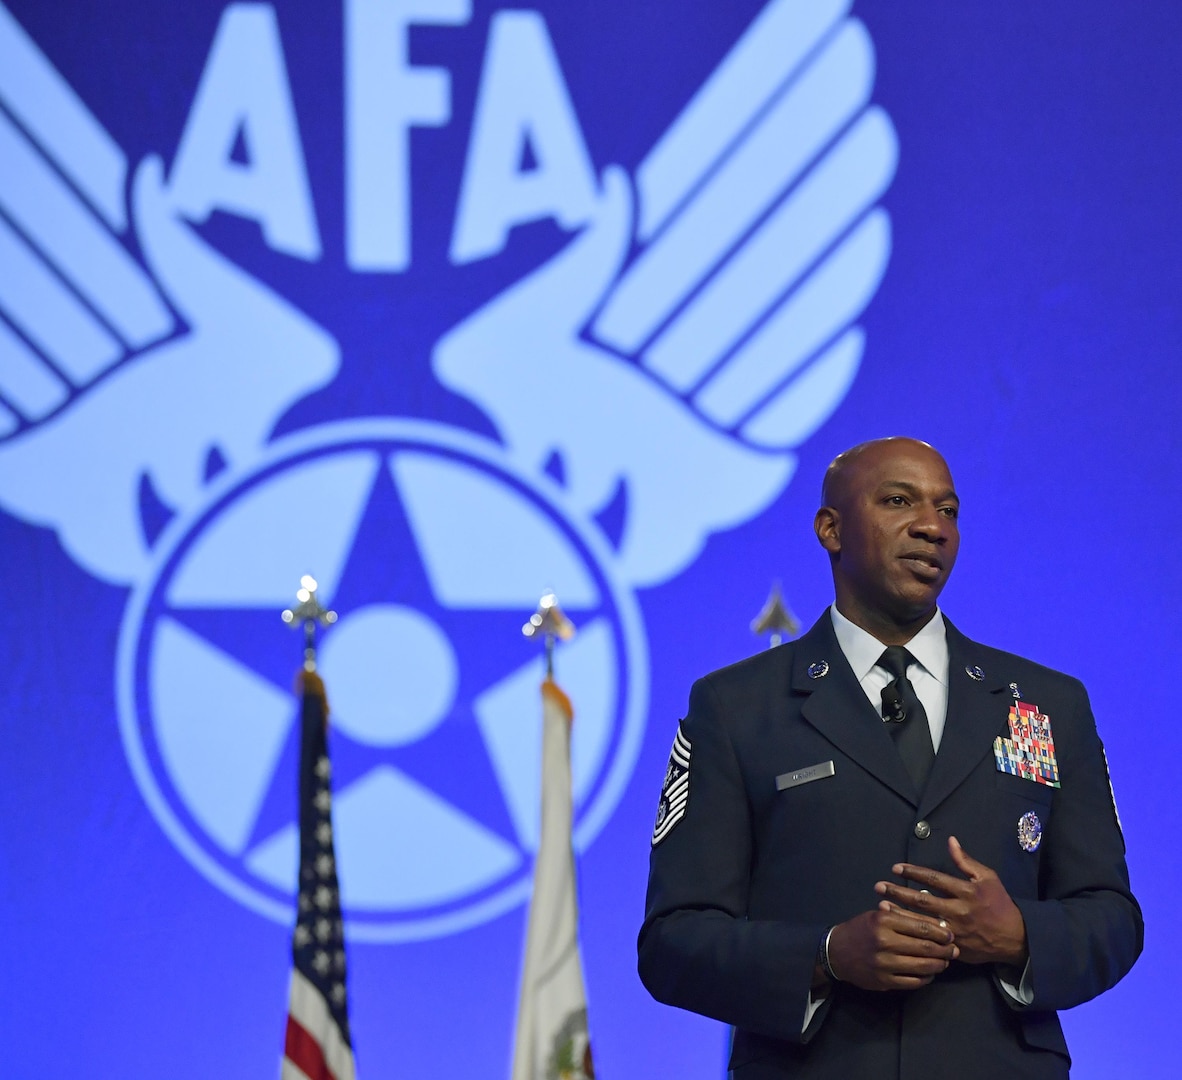 Chief Master Sgt. of the Air Force Kaleth O. Wright gives his "Taking Care of Airmen from the Ground Up" talk during Air Force Association Air, Space and Cyber Conference in National Harbor, Md., Sept. 20, 2017.